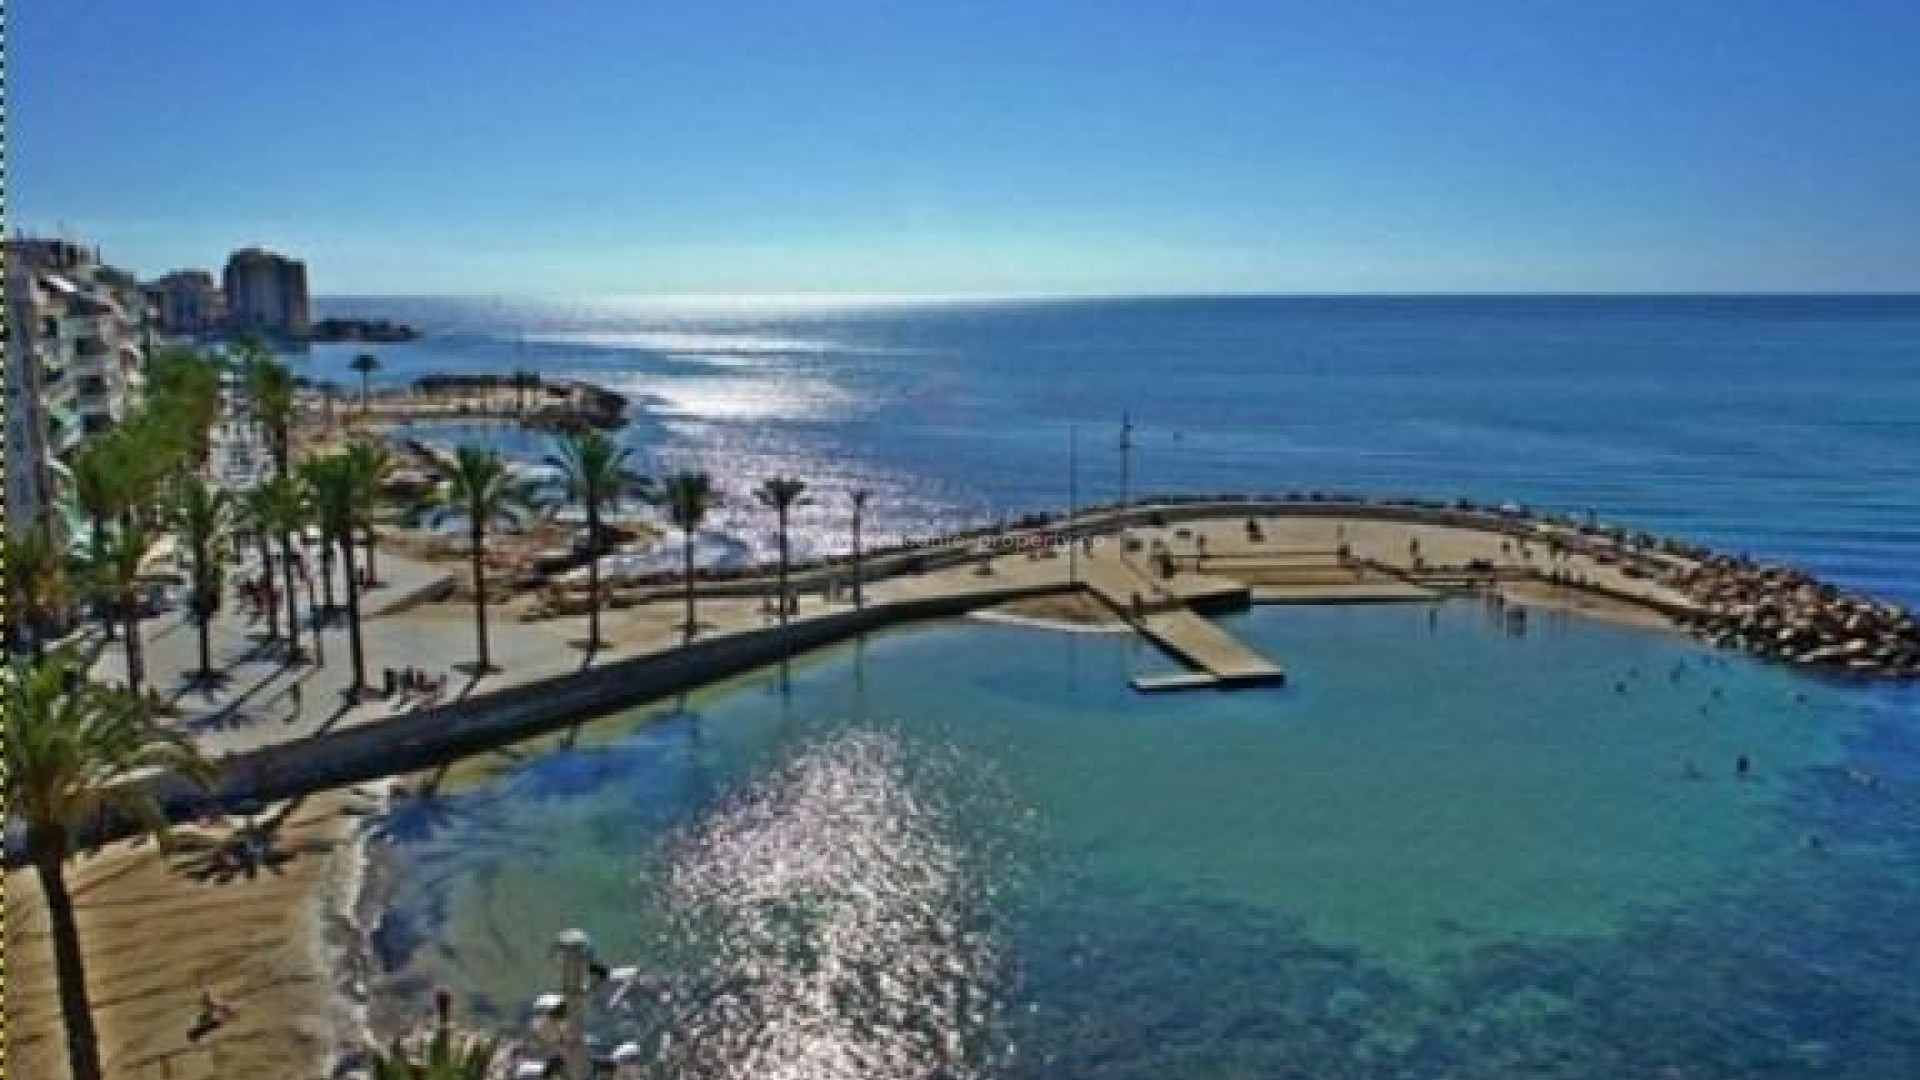 Modern 17 exclusive apartments/penthouses in Torrevieja, 1/2 bedroom, 1/2 bathroom, beautiful shared solarium with swimming pool